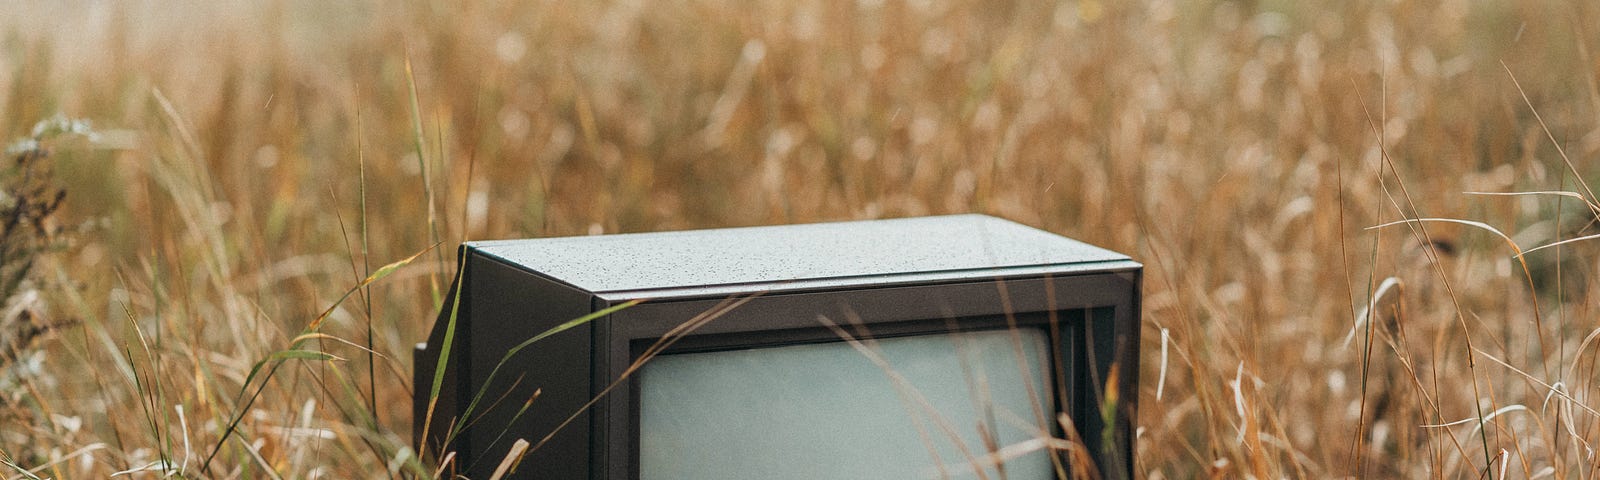 An old television sitting in a field.